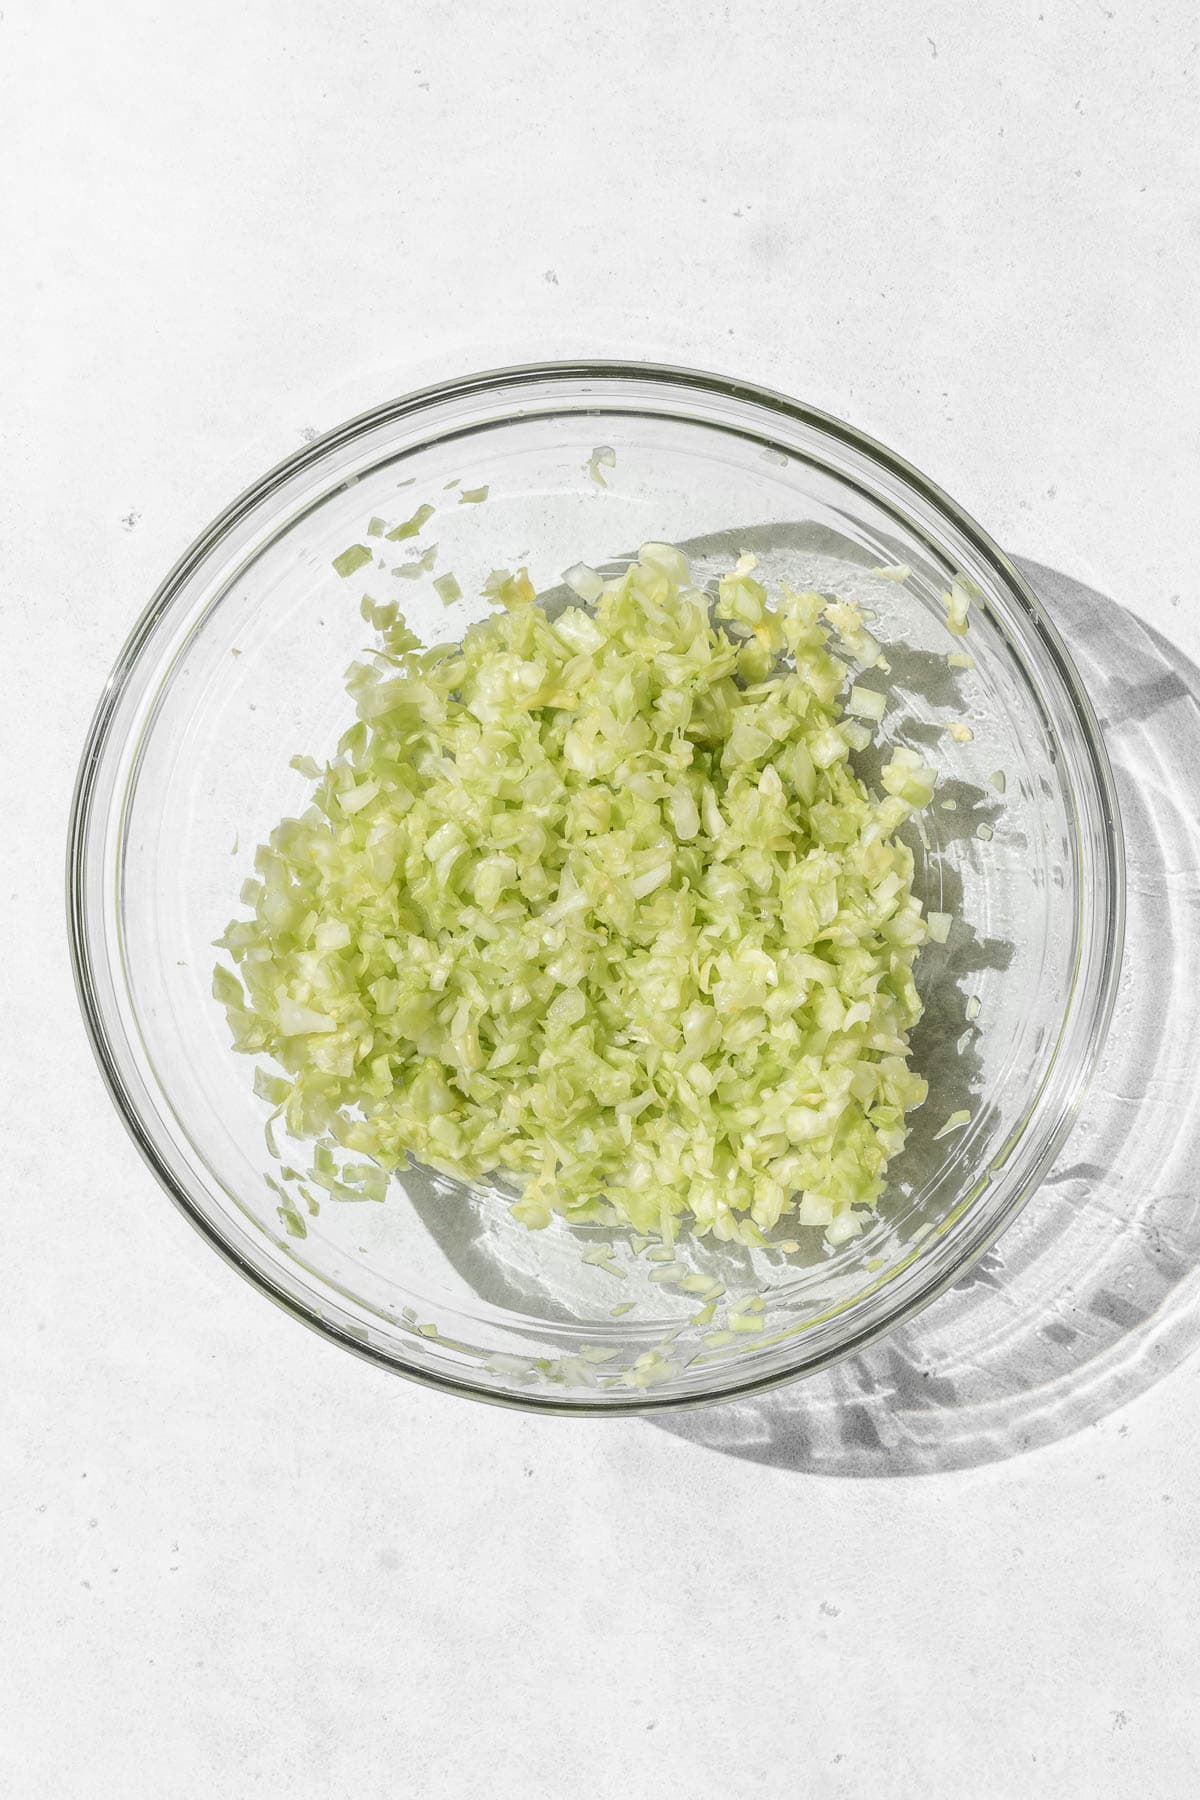 Minced cabbage in a glass bowl on a white surface.